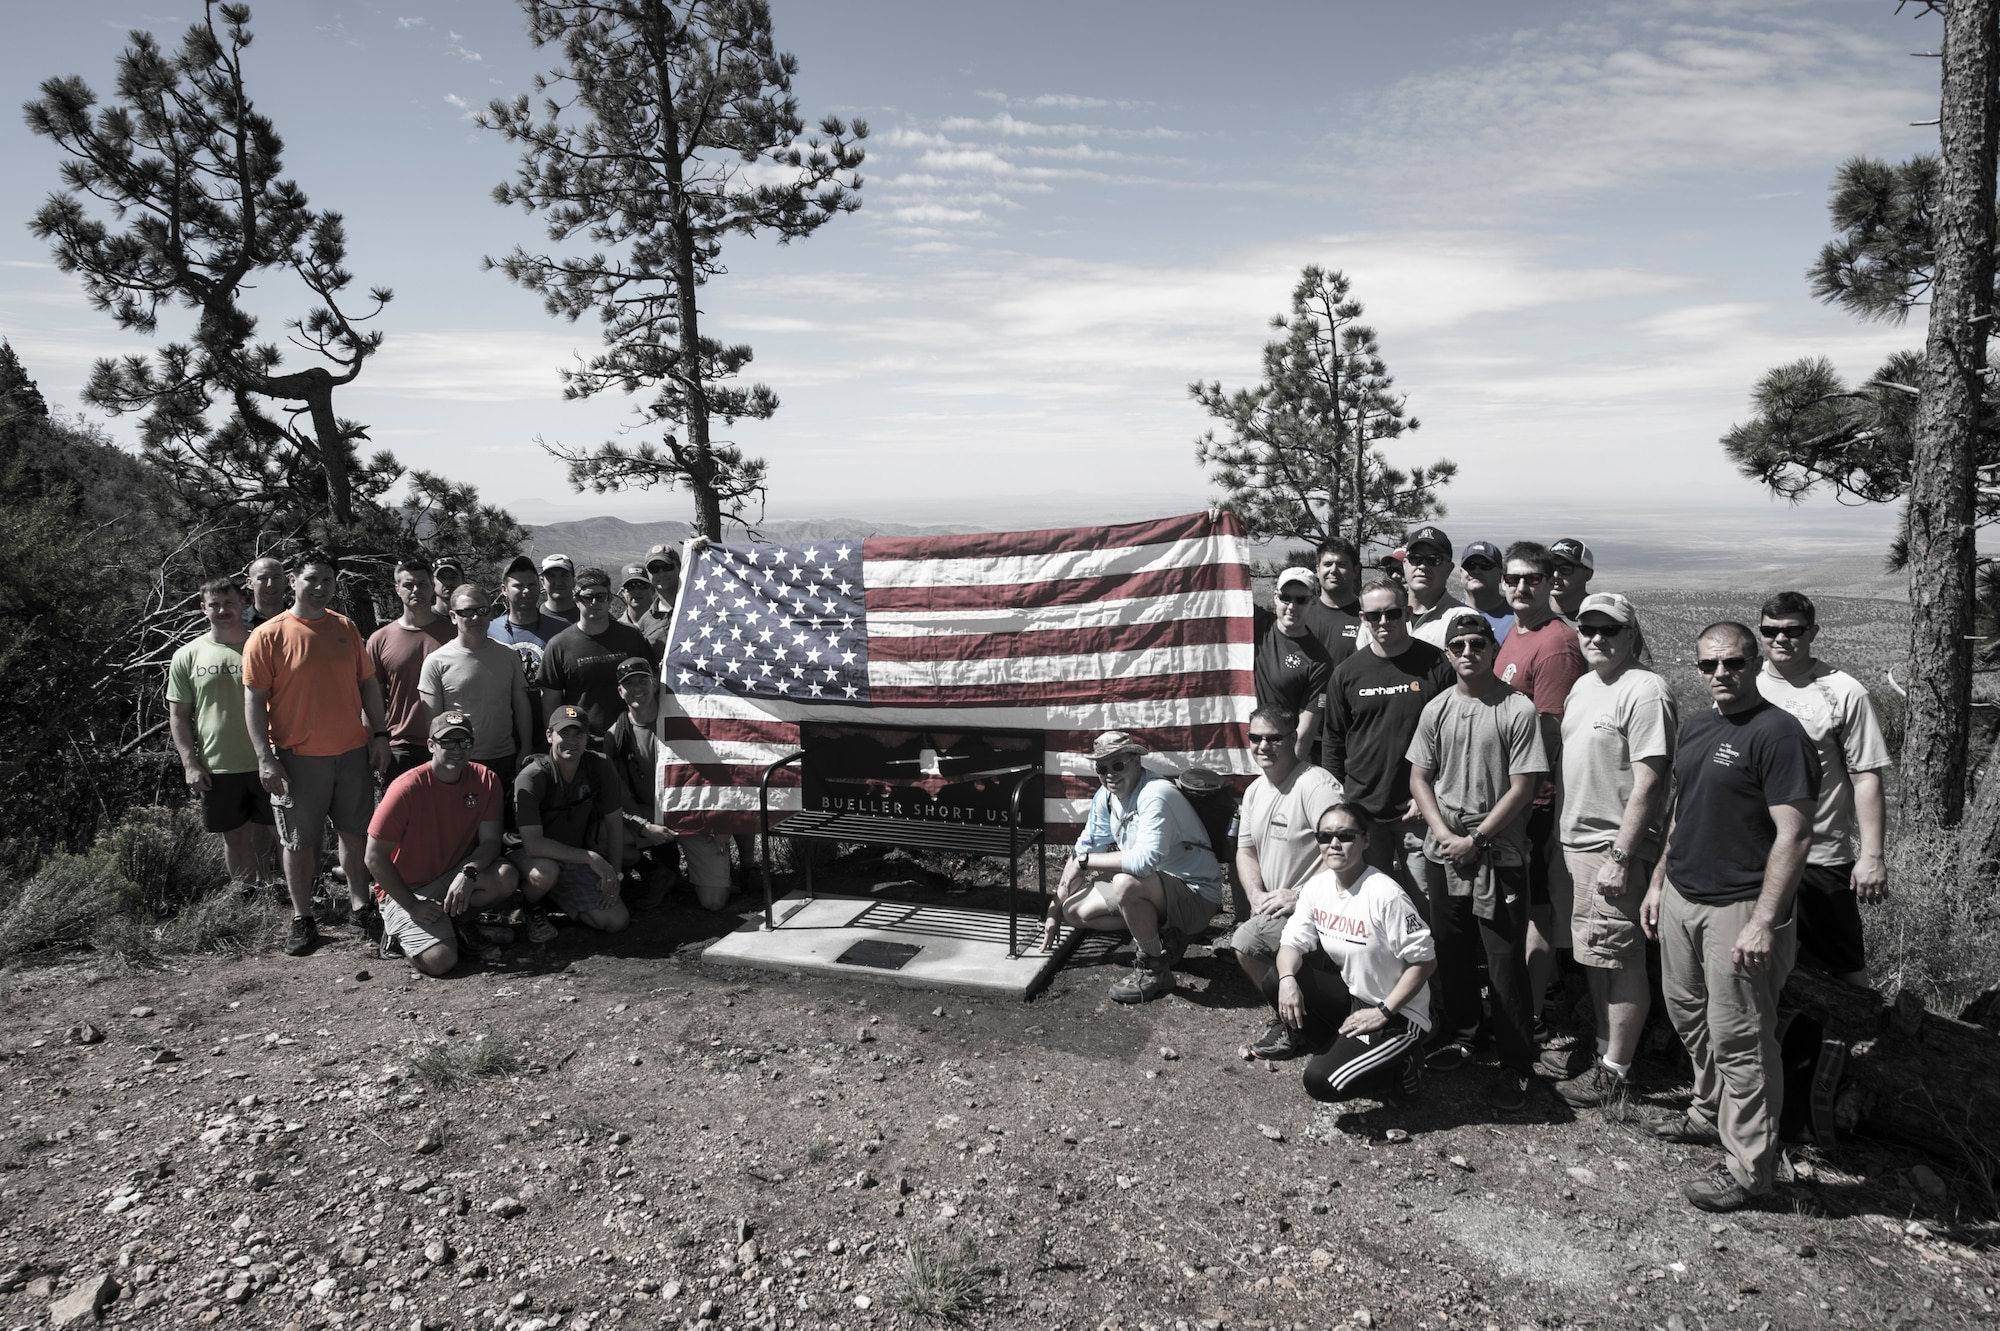 In memory of Lt. Christopher “Bueller” Short, U.S. Navy pilot, a bench was placed at the end of the Rim Trail in the Tularosa Basin, N.M., July 13, 2018. Short lost his life when an A-29 Super Tucano crashed over the Red Rio Bombing Range, June 22, 2018. (U.S. Air Force photo illustration by Senior Airman Chase Cannon)